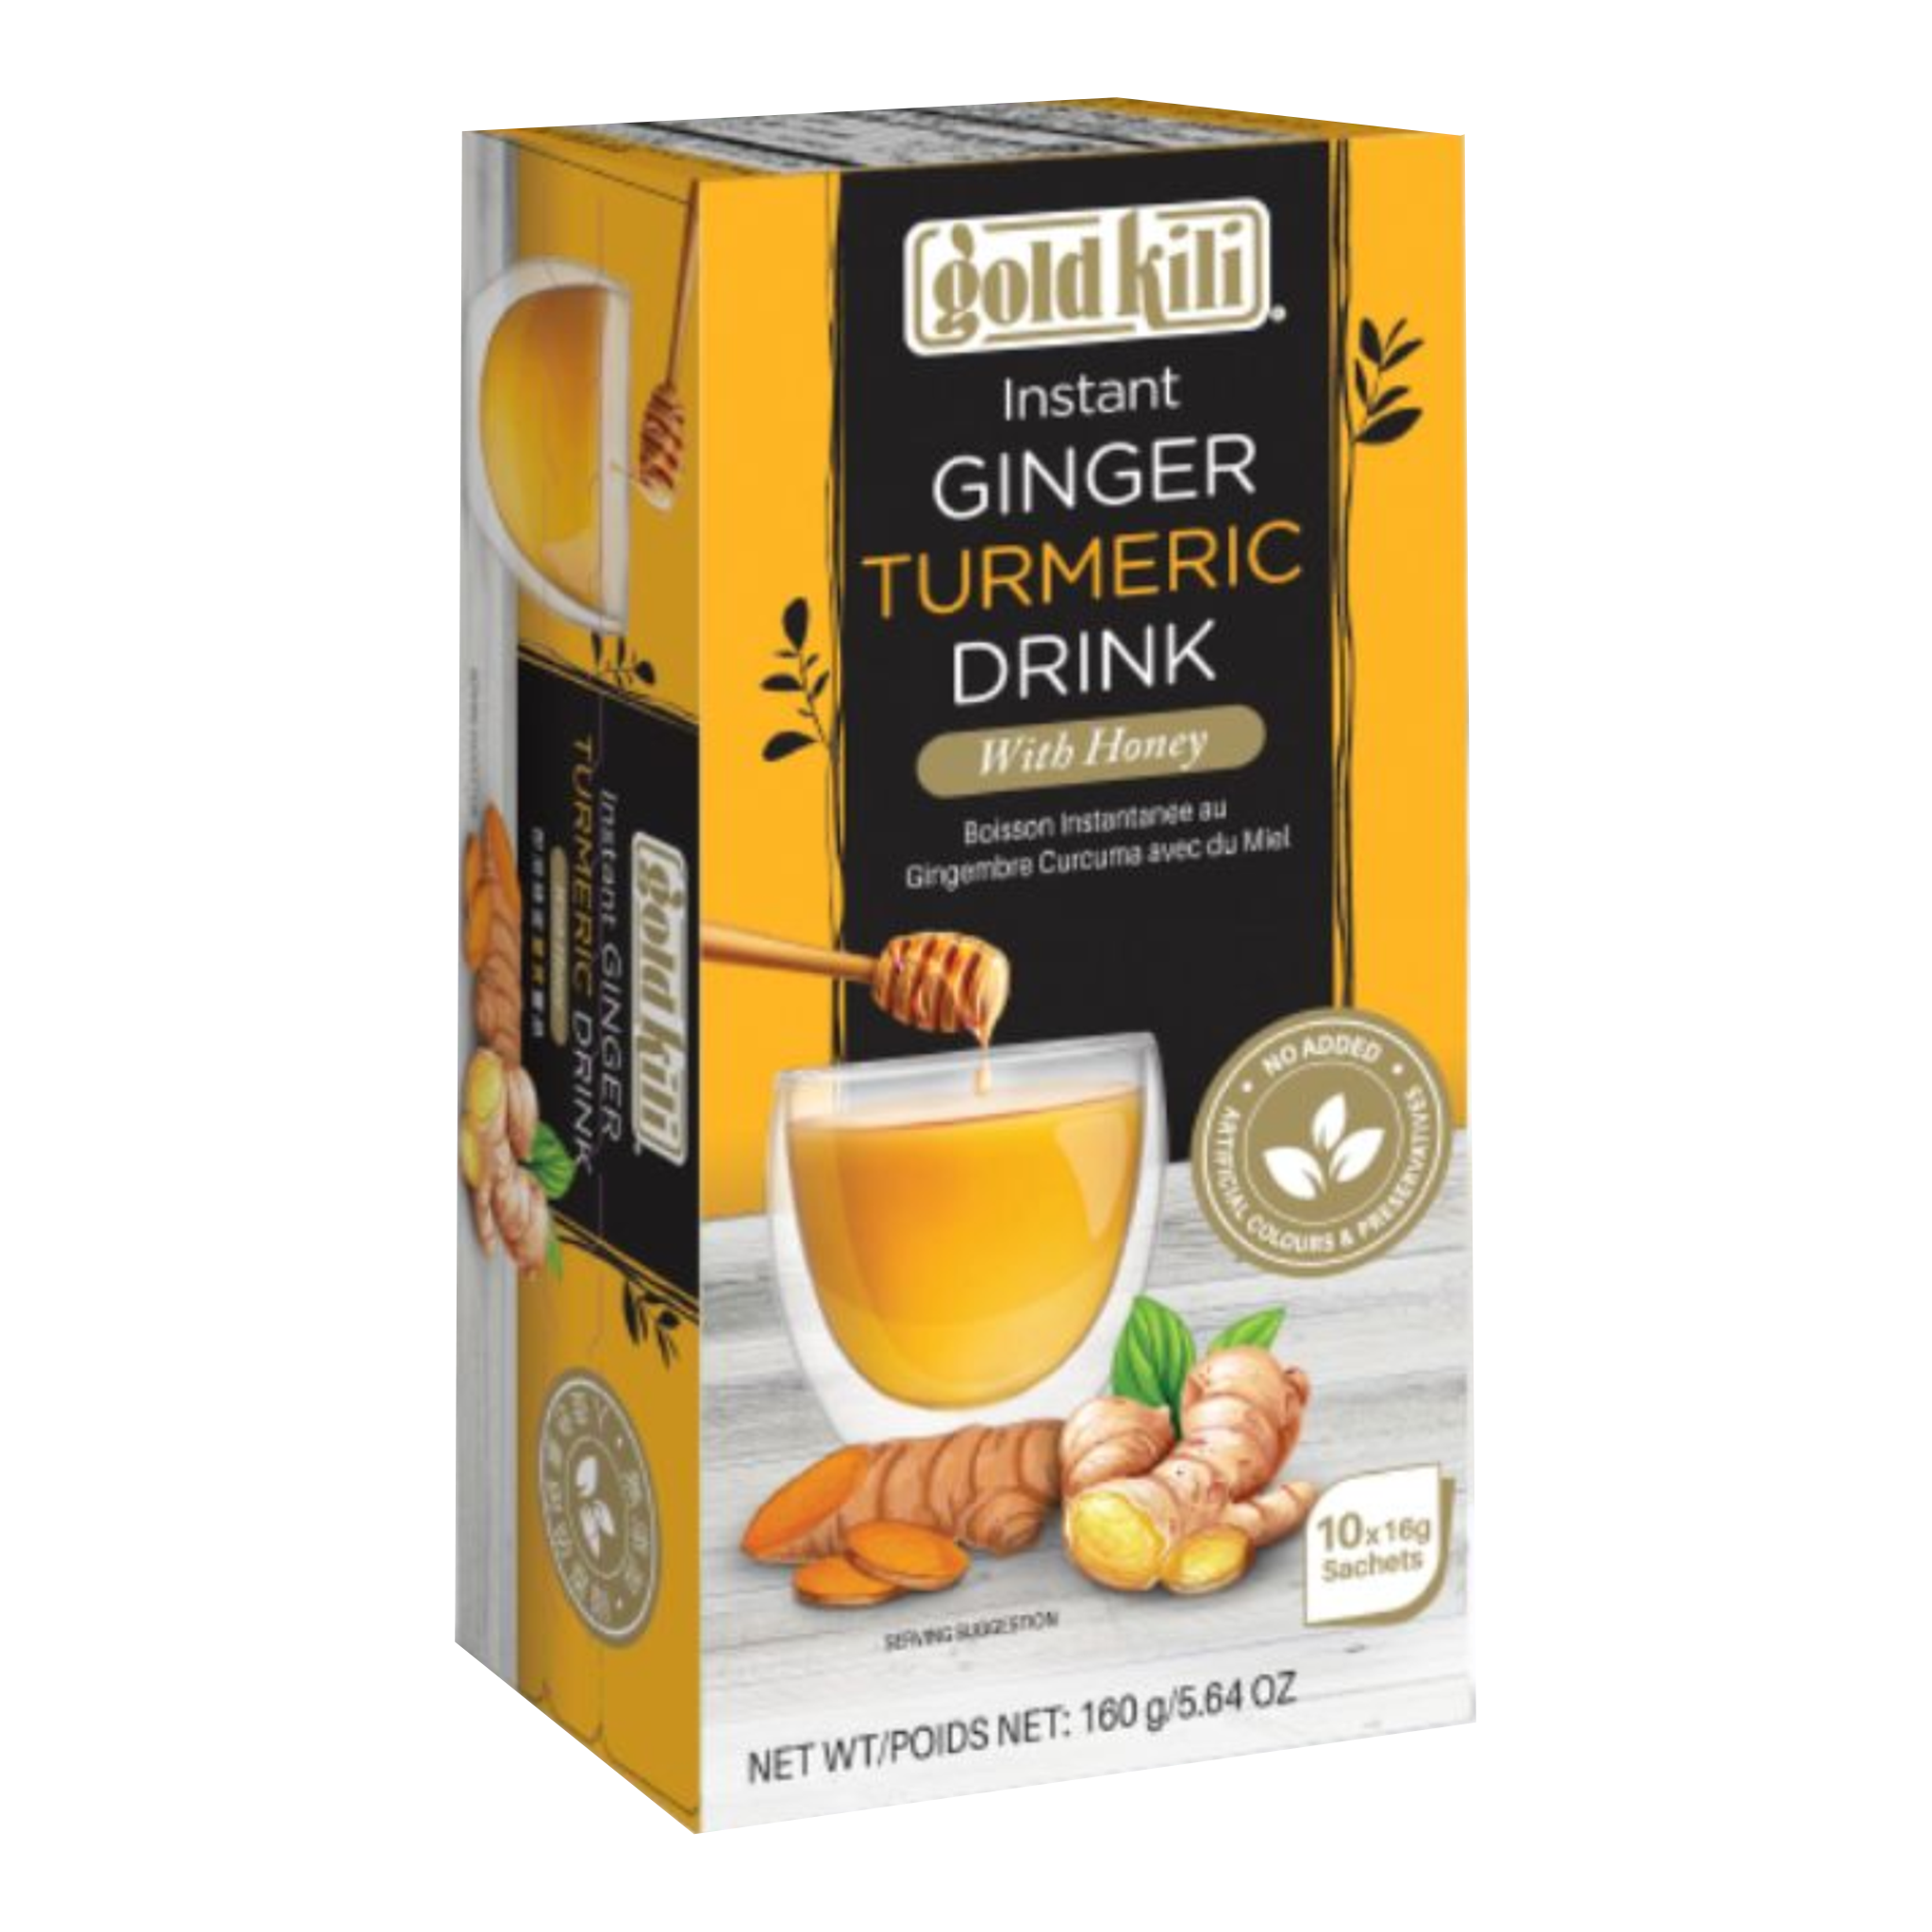 Instant Ginger Turmeric Drink with honey (10 sachets) 160g by Gold Kili